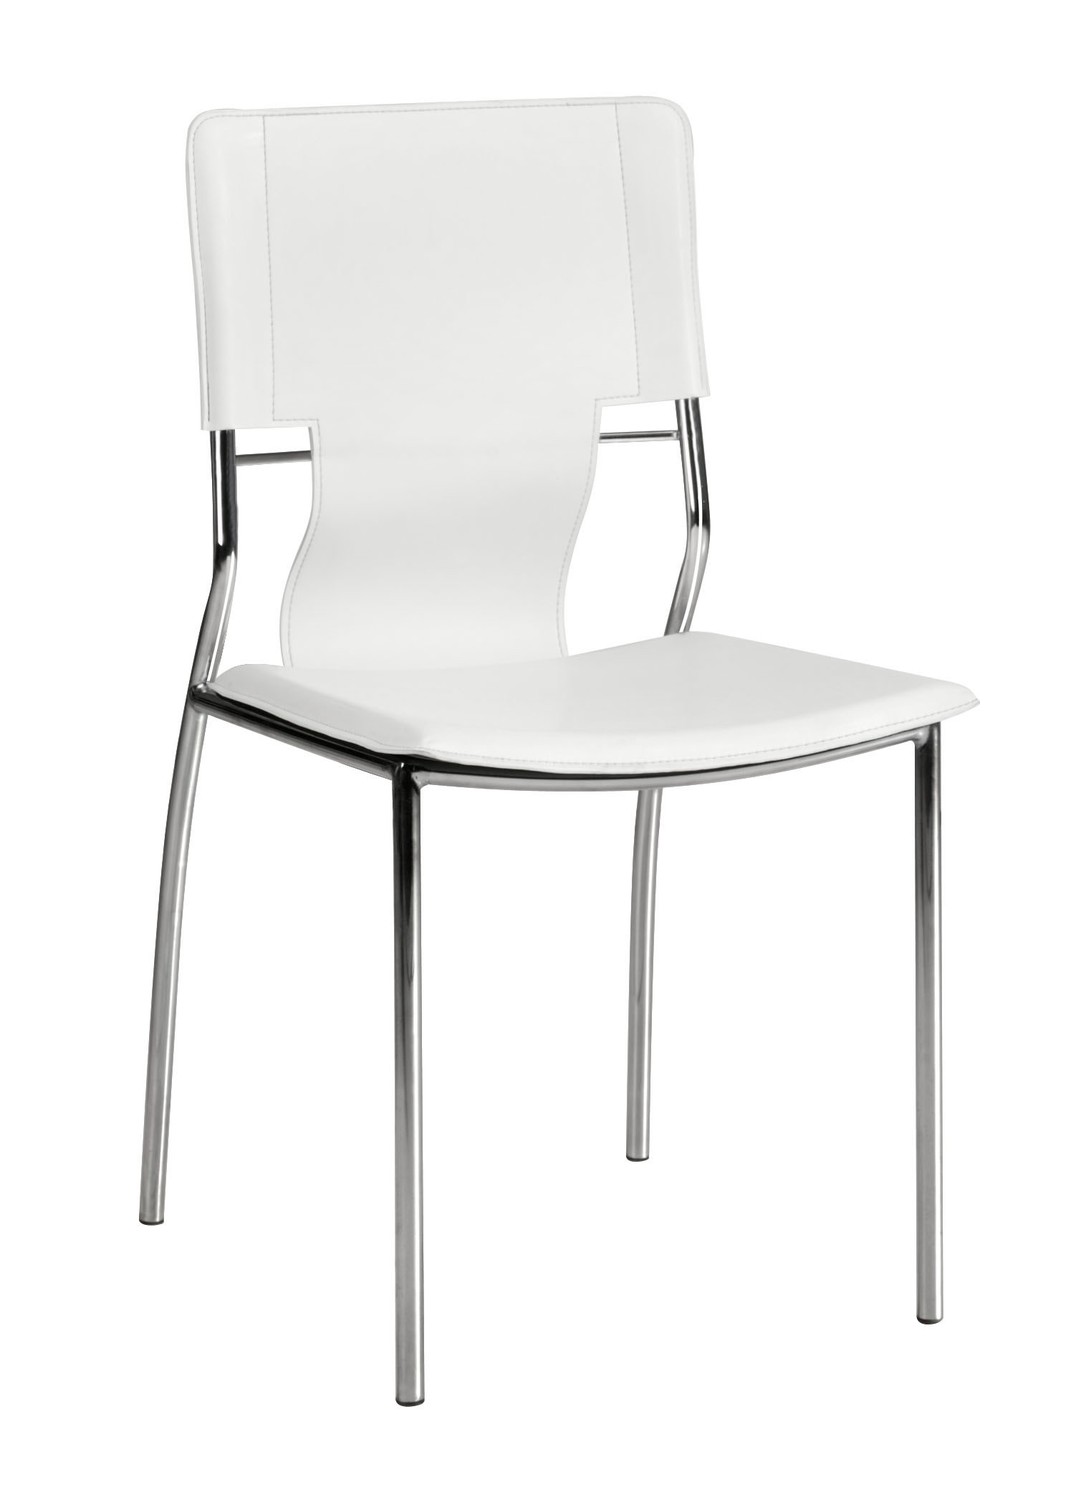 17" x 20" x 33" White, Leatherette, Chromed Steel, Dining Chair - Set of 4